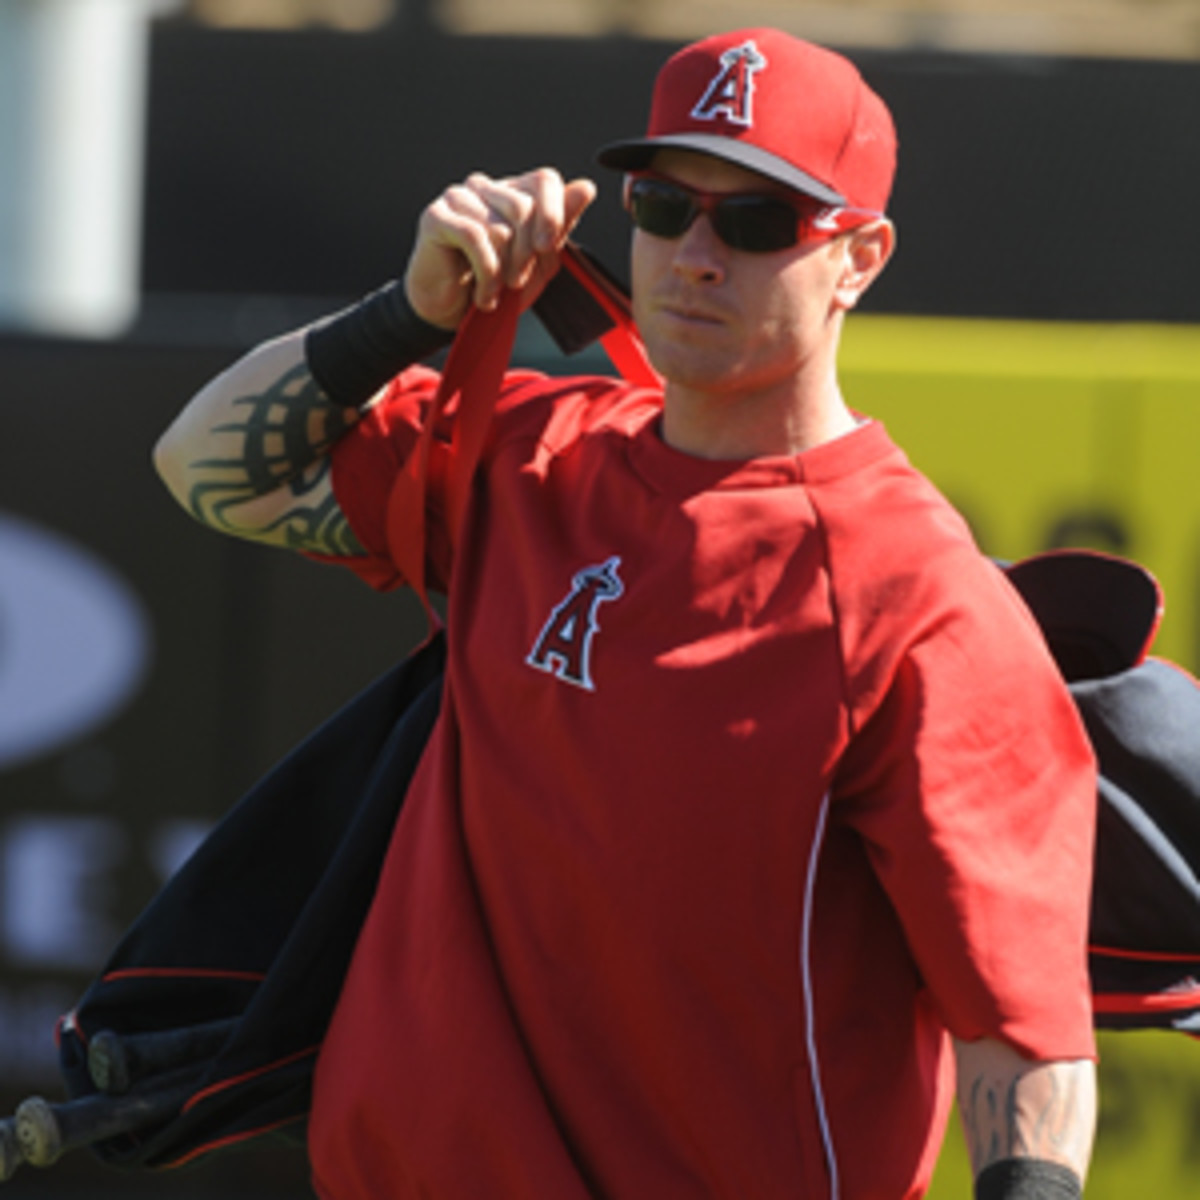 Josh Hamilton expects to get booed in his first appearance as an Angel in Texas on April 5. (Rich Pilling/Getty Images)